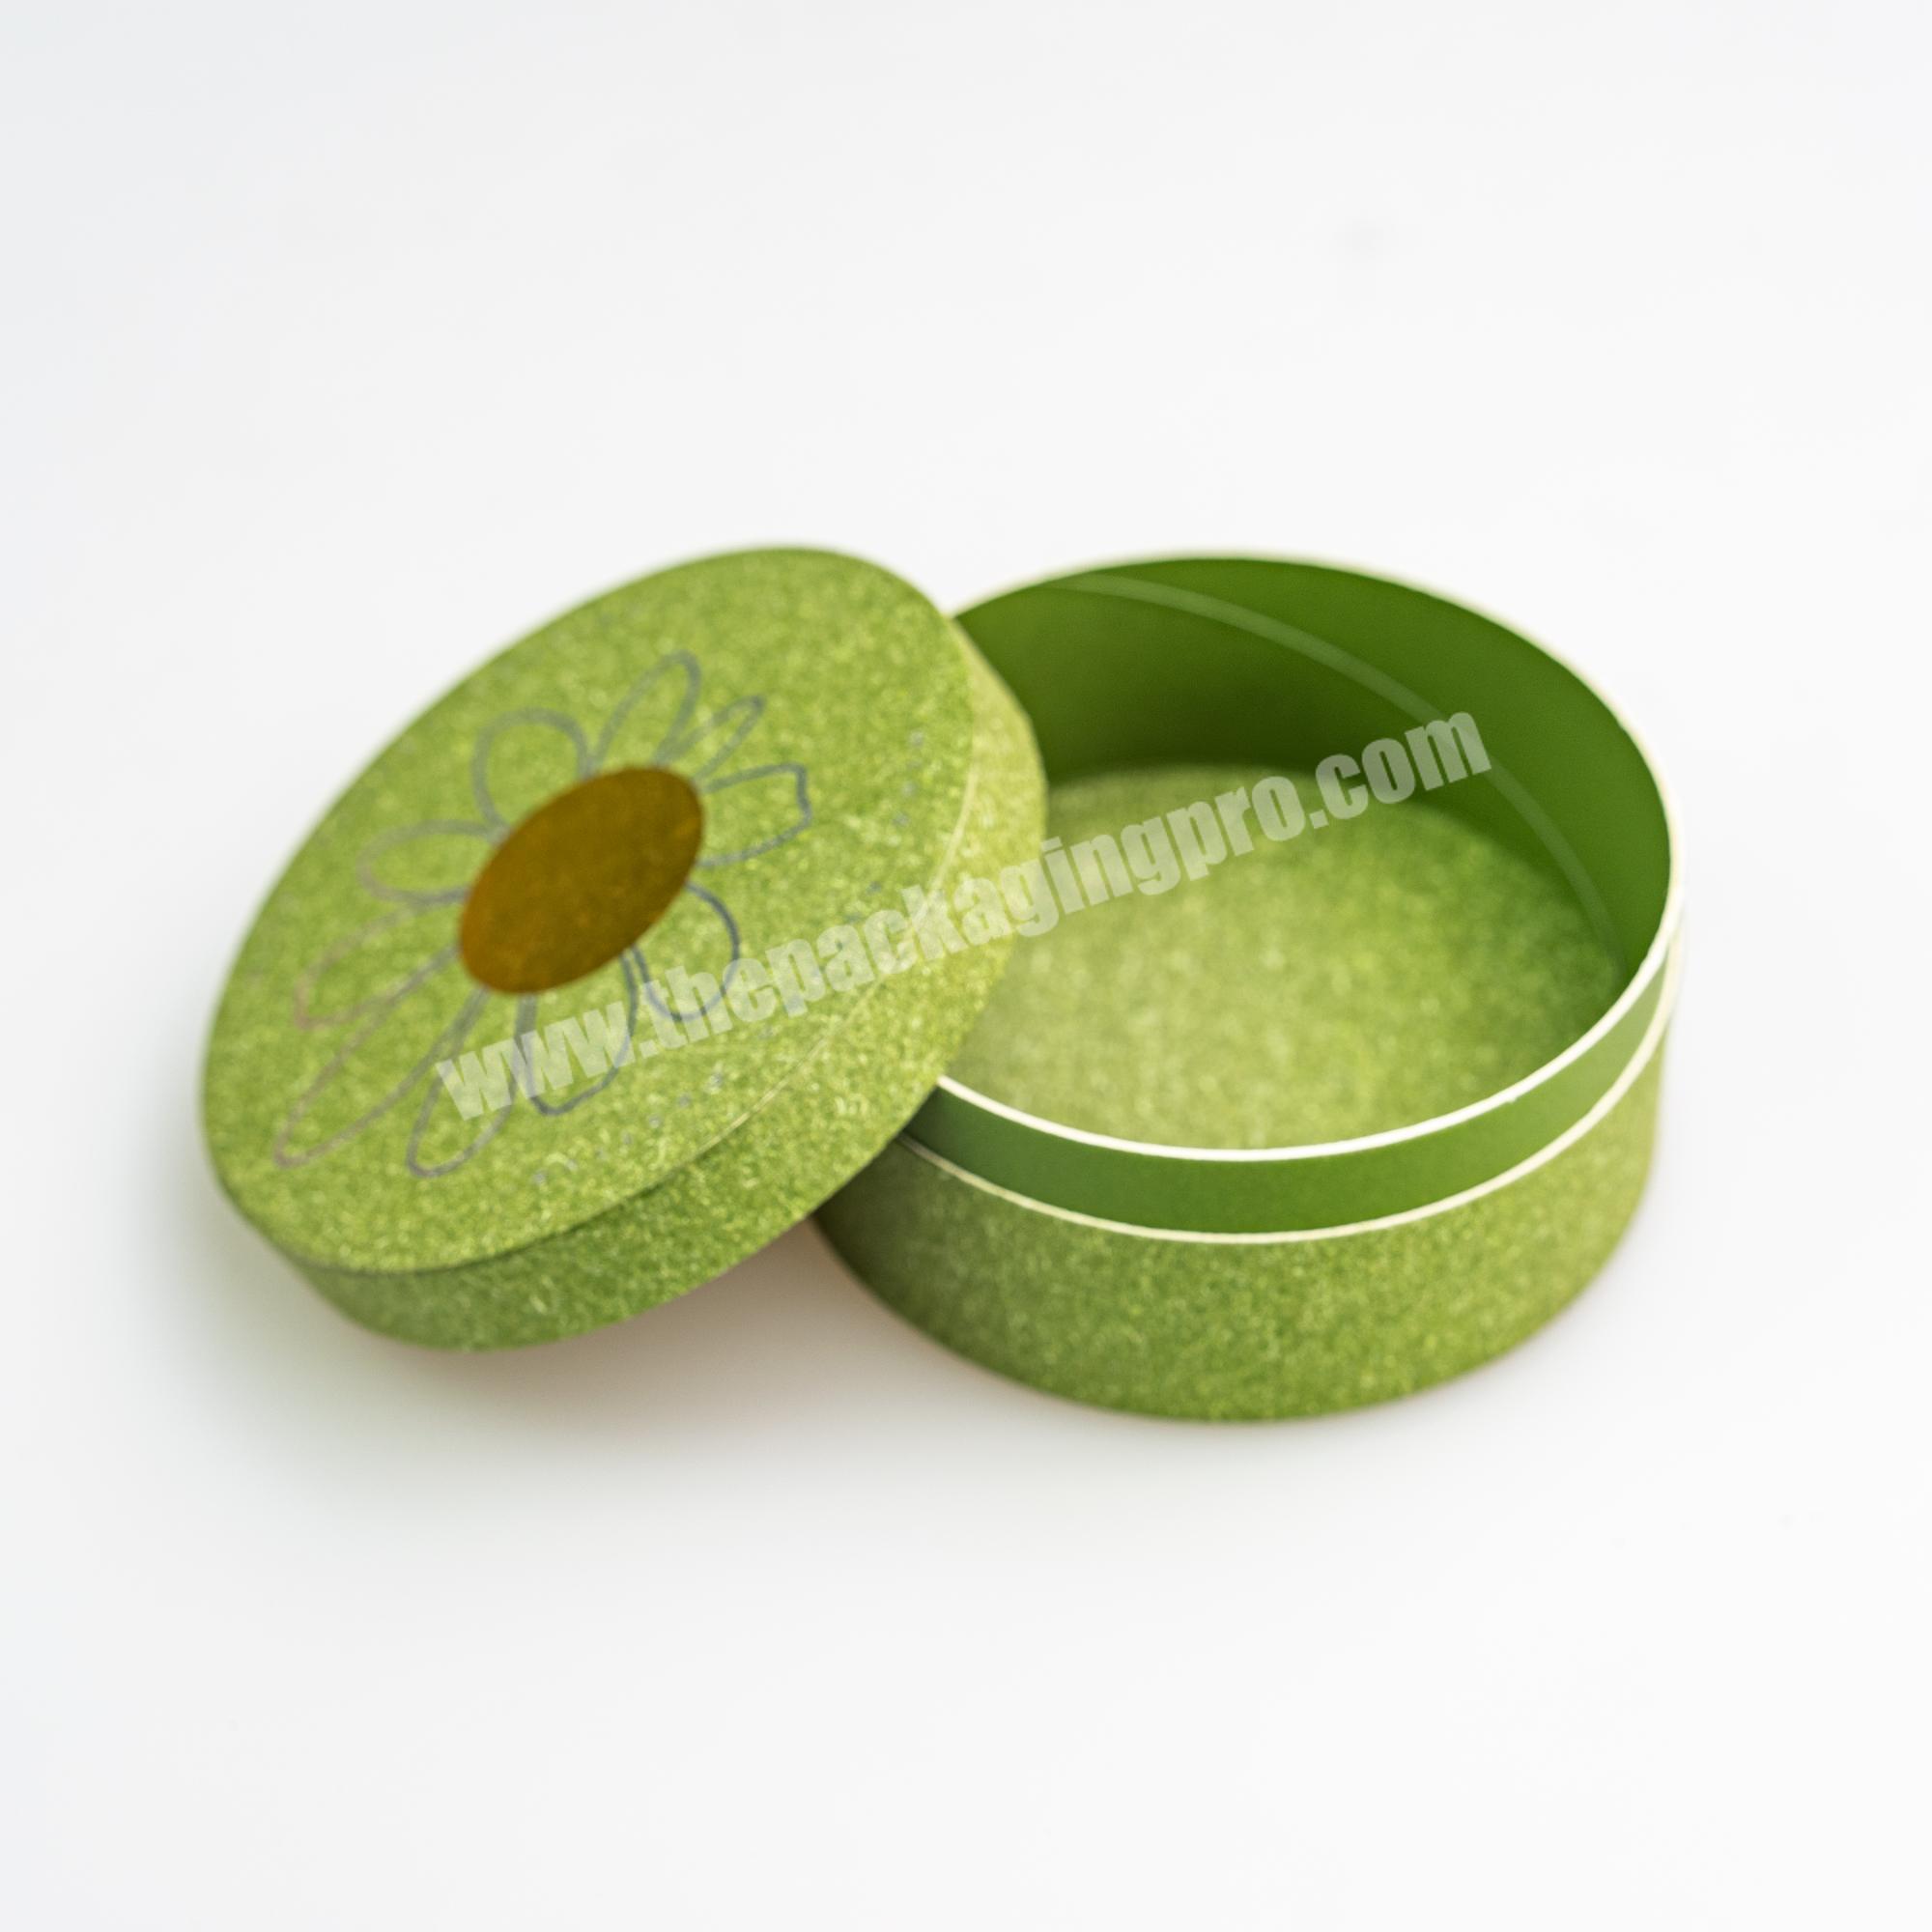 Accept Custom Order and Paper Material round hat boxes with lids,occassion labelled  round hat box